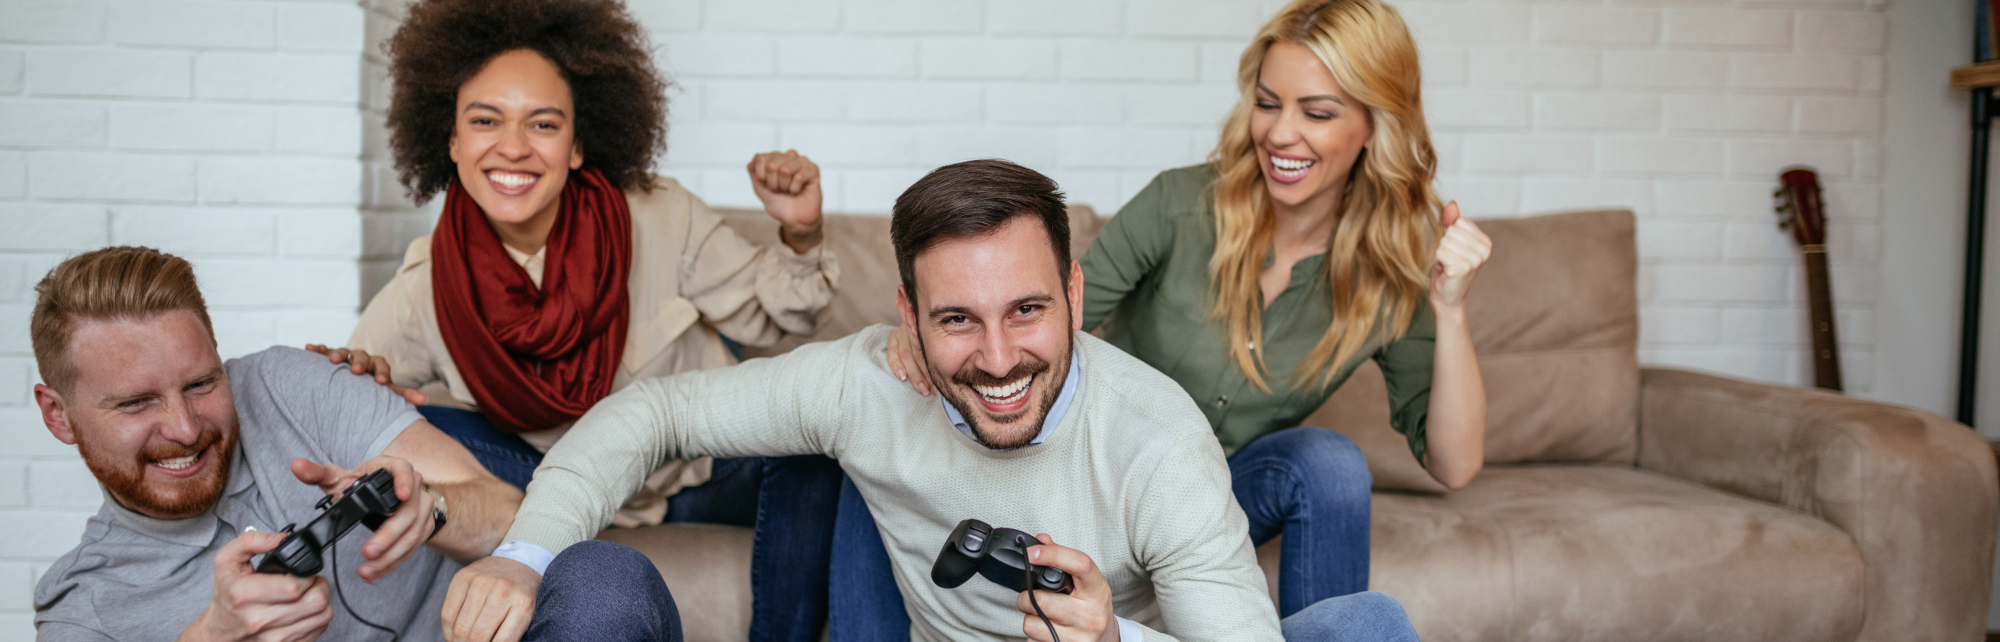 Four adults gathering playing video game